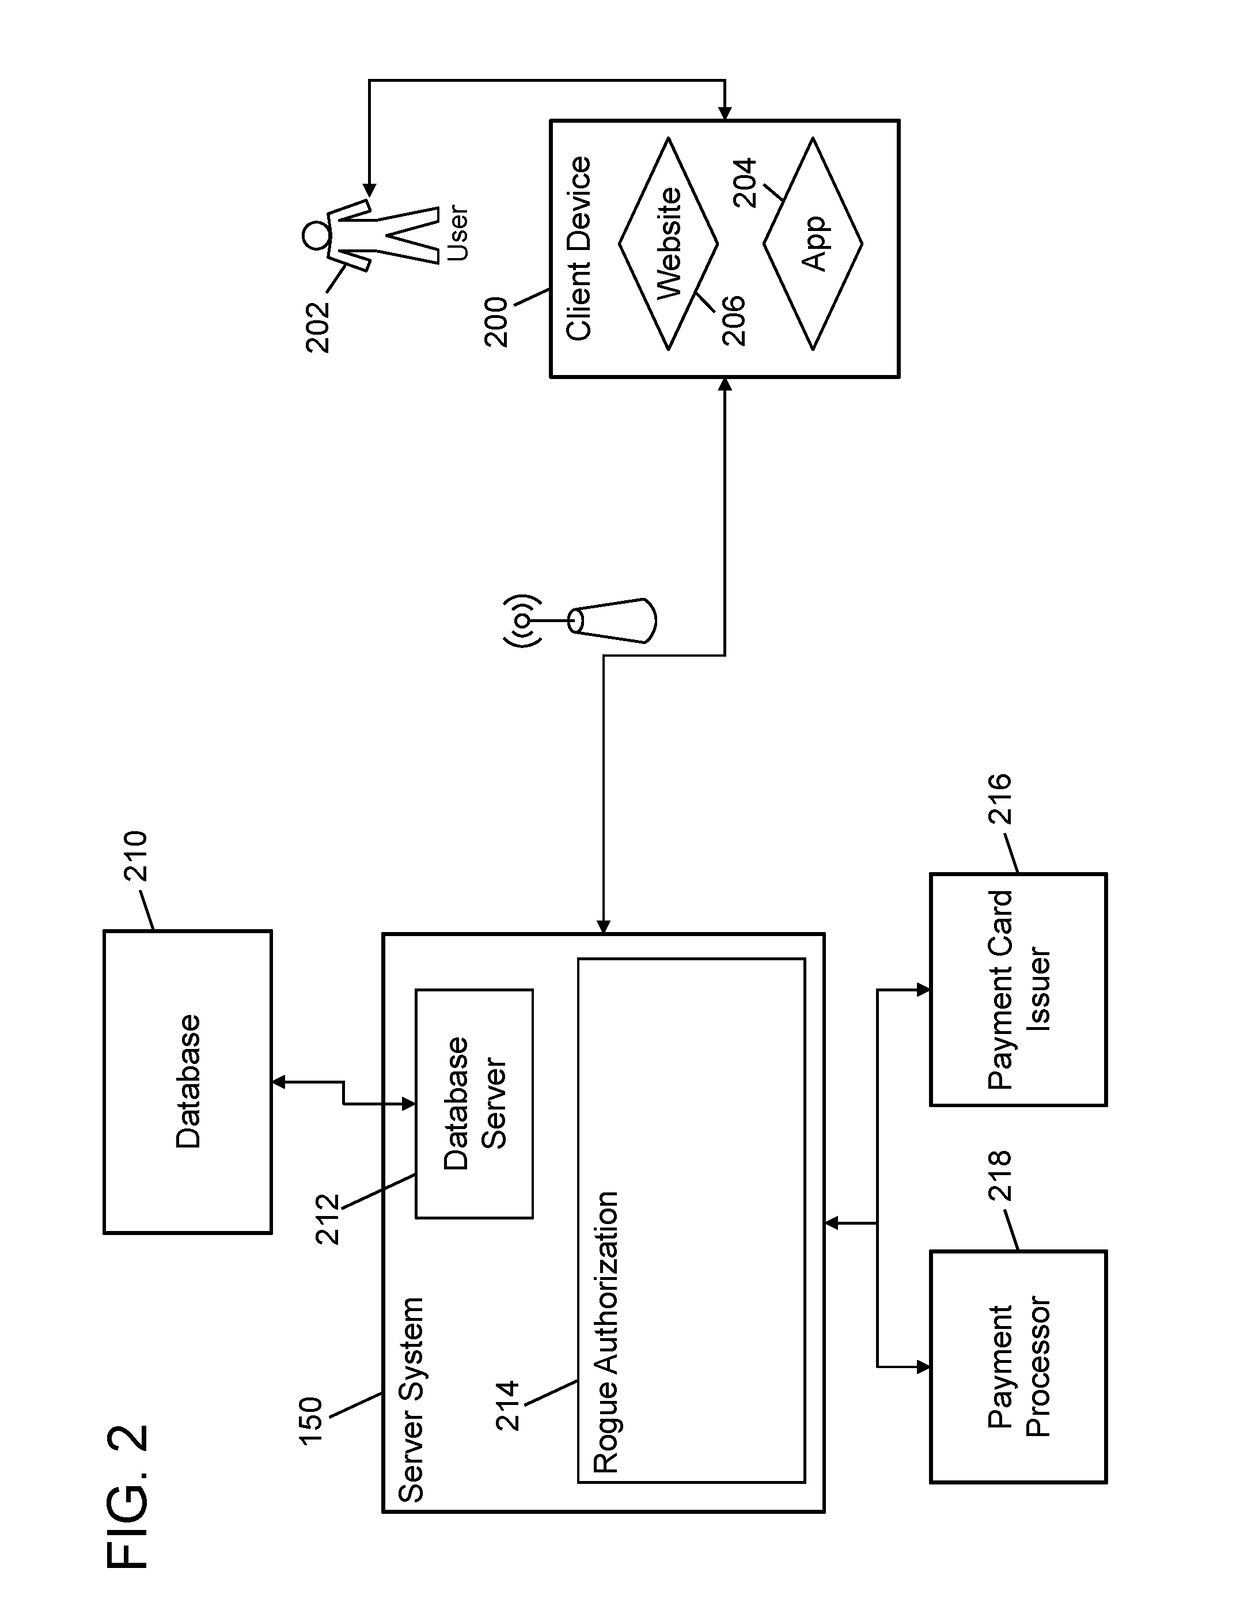 Electronic payment card systems and methods with rogue authorization charge identification and resolution